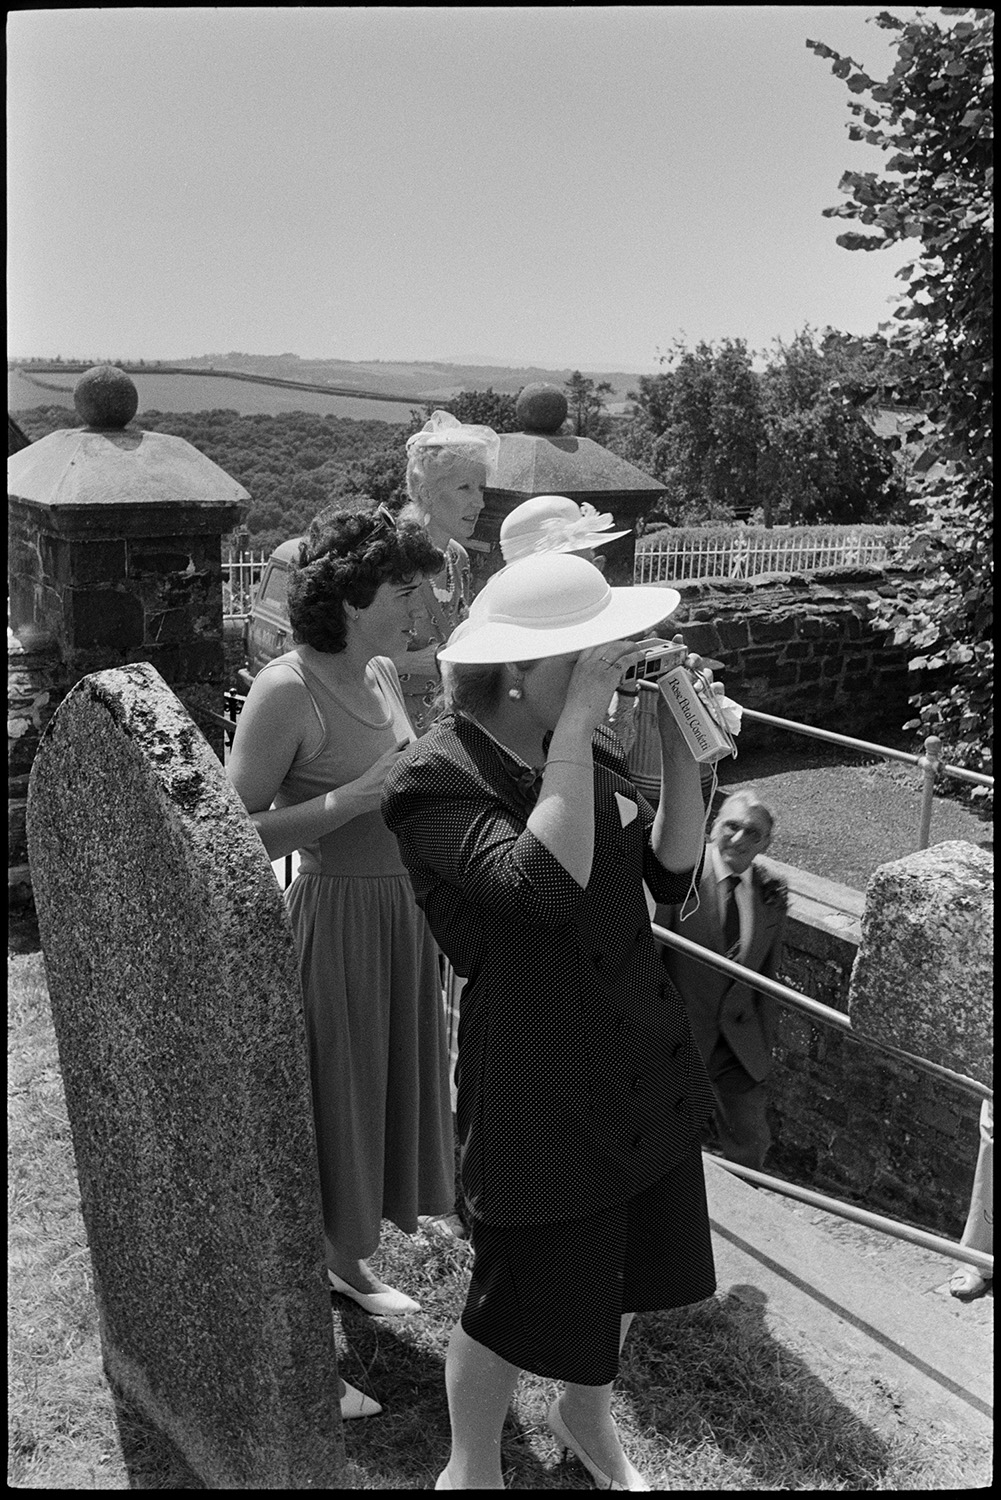 Wedding spectators, bride, groom, bridesmaids being photographed Photographer changing film.
[A group of four women standing in the churchyard of the Church of St Mary Magdalene, Chulmleigh taking photographs at a wedding. The women are wearing hats.]